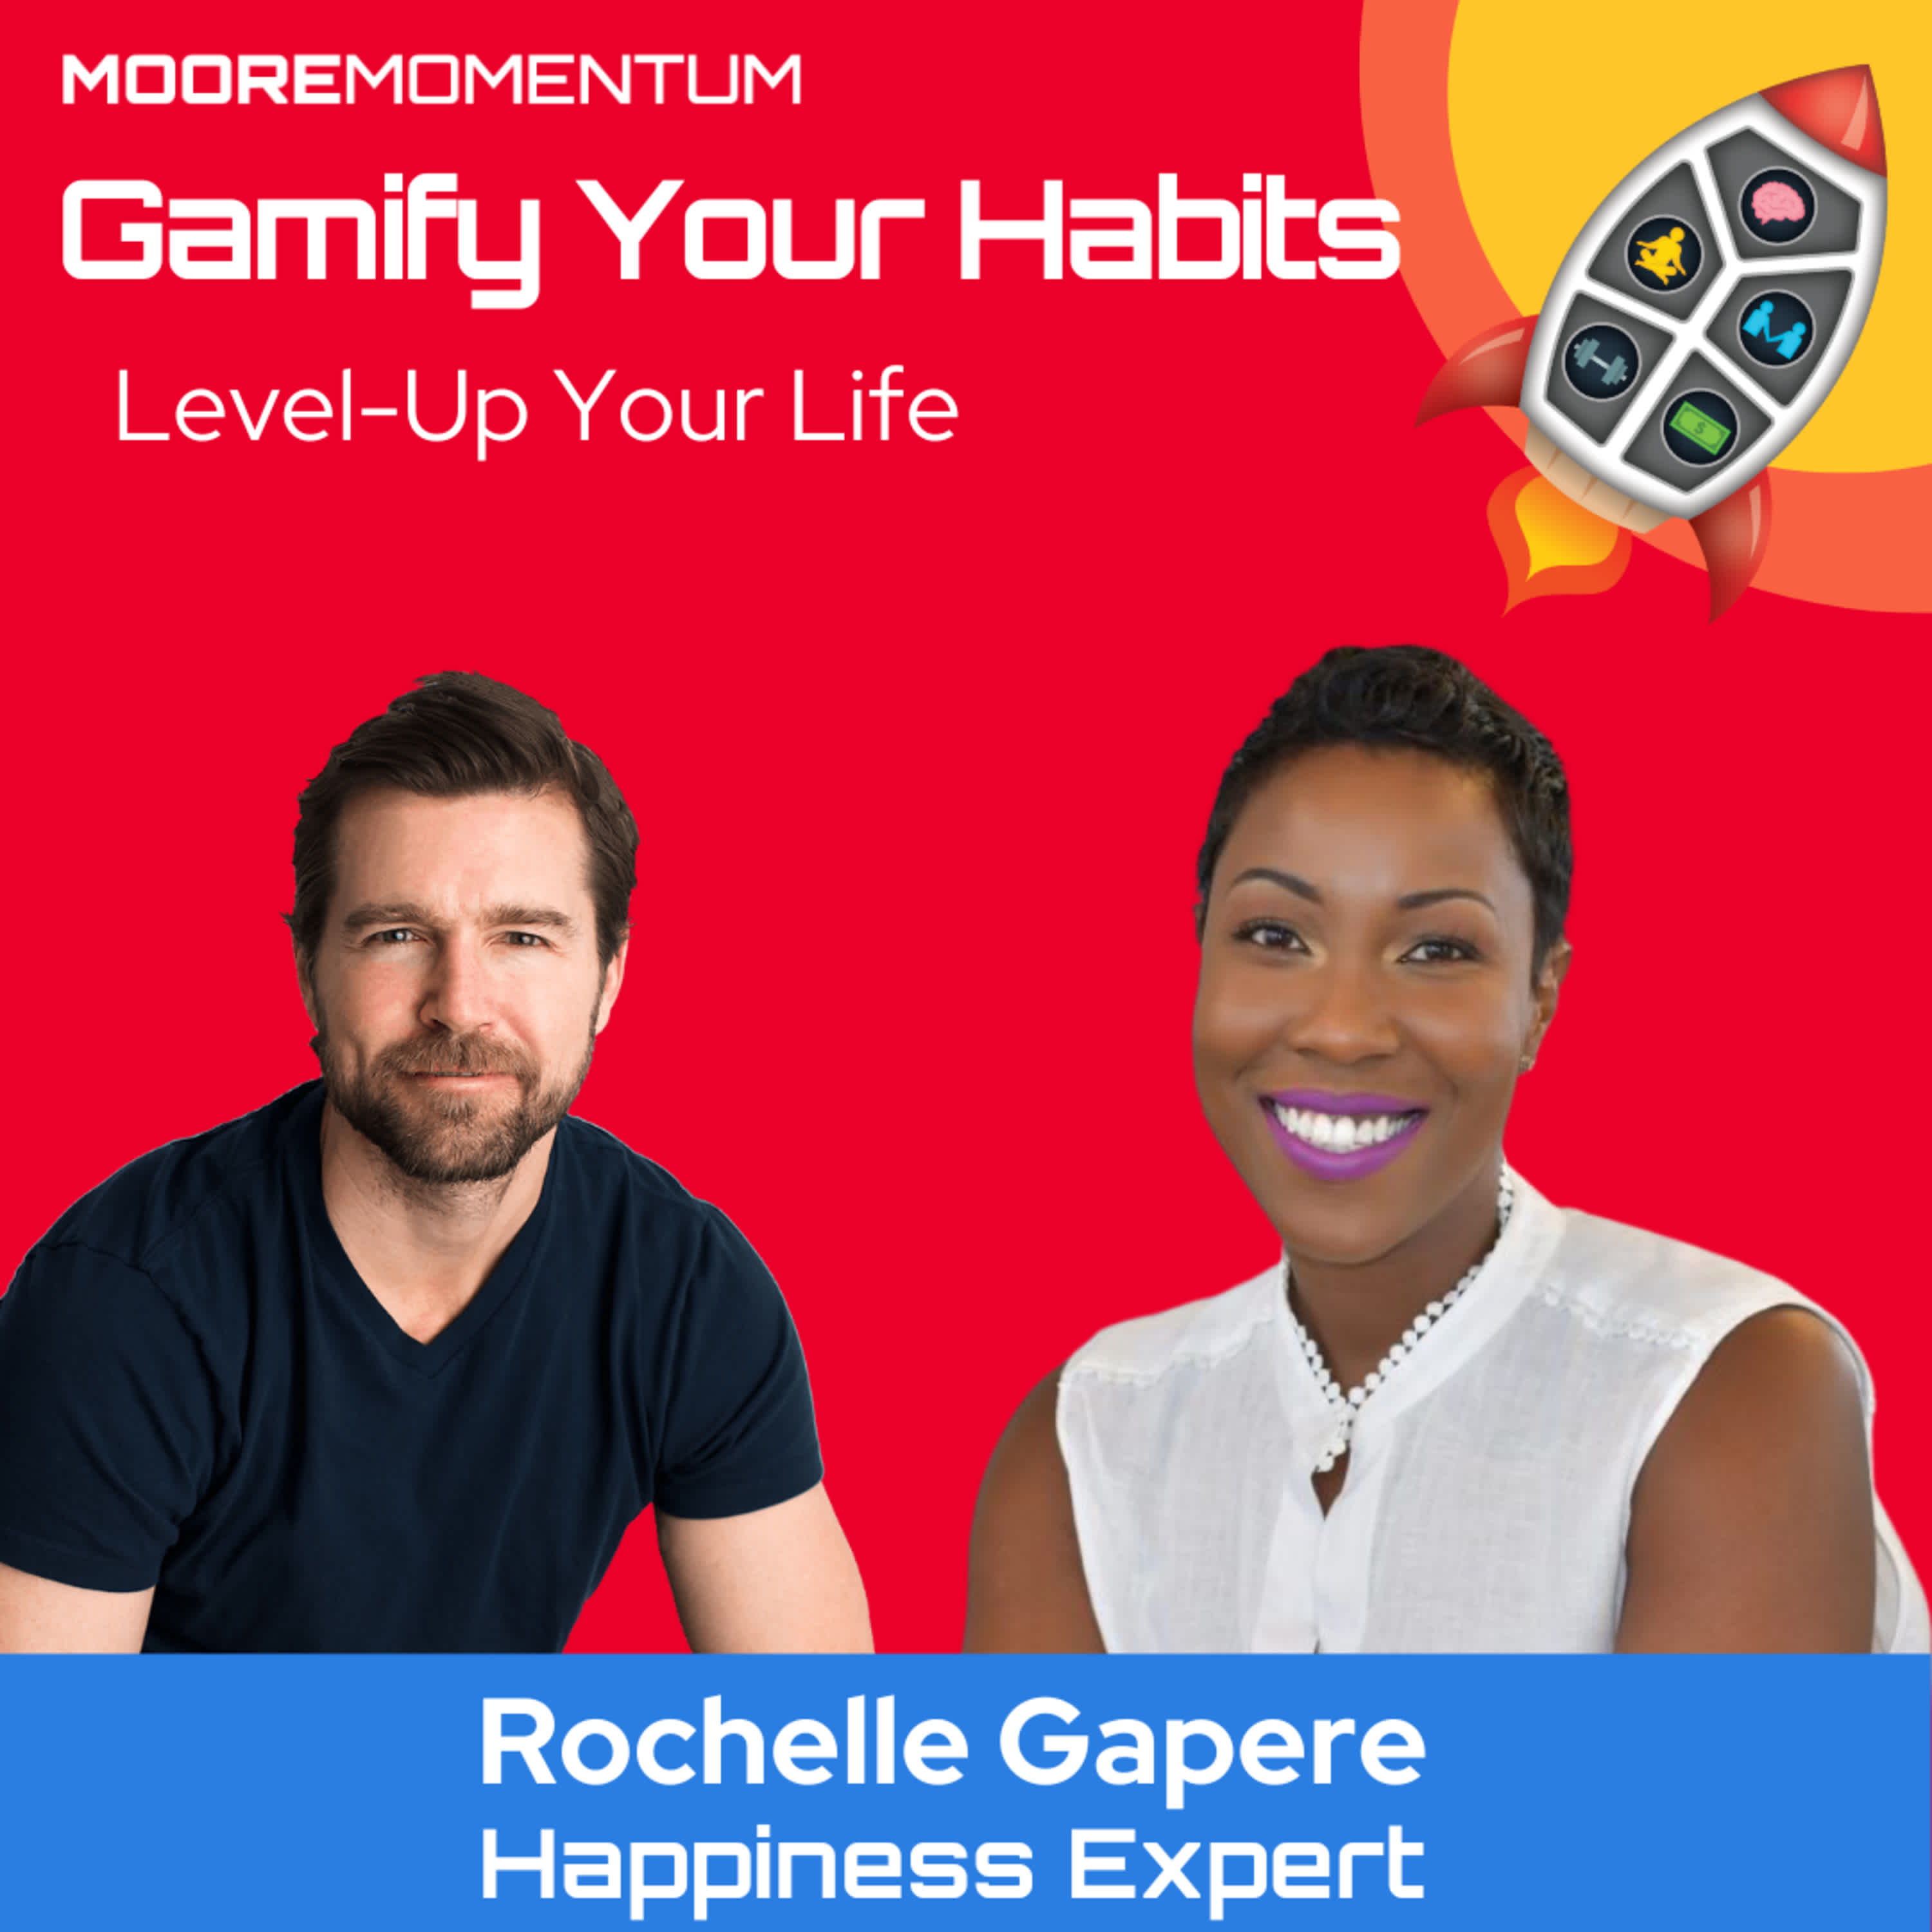  Before you can improve your happiness, you must be aware of what your current habits are. Will and Rochelle Gapere discuss the behavioral science behind what it takes to be happy and how to use the laws of the universe to your advantage